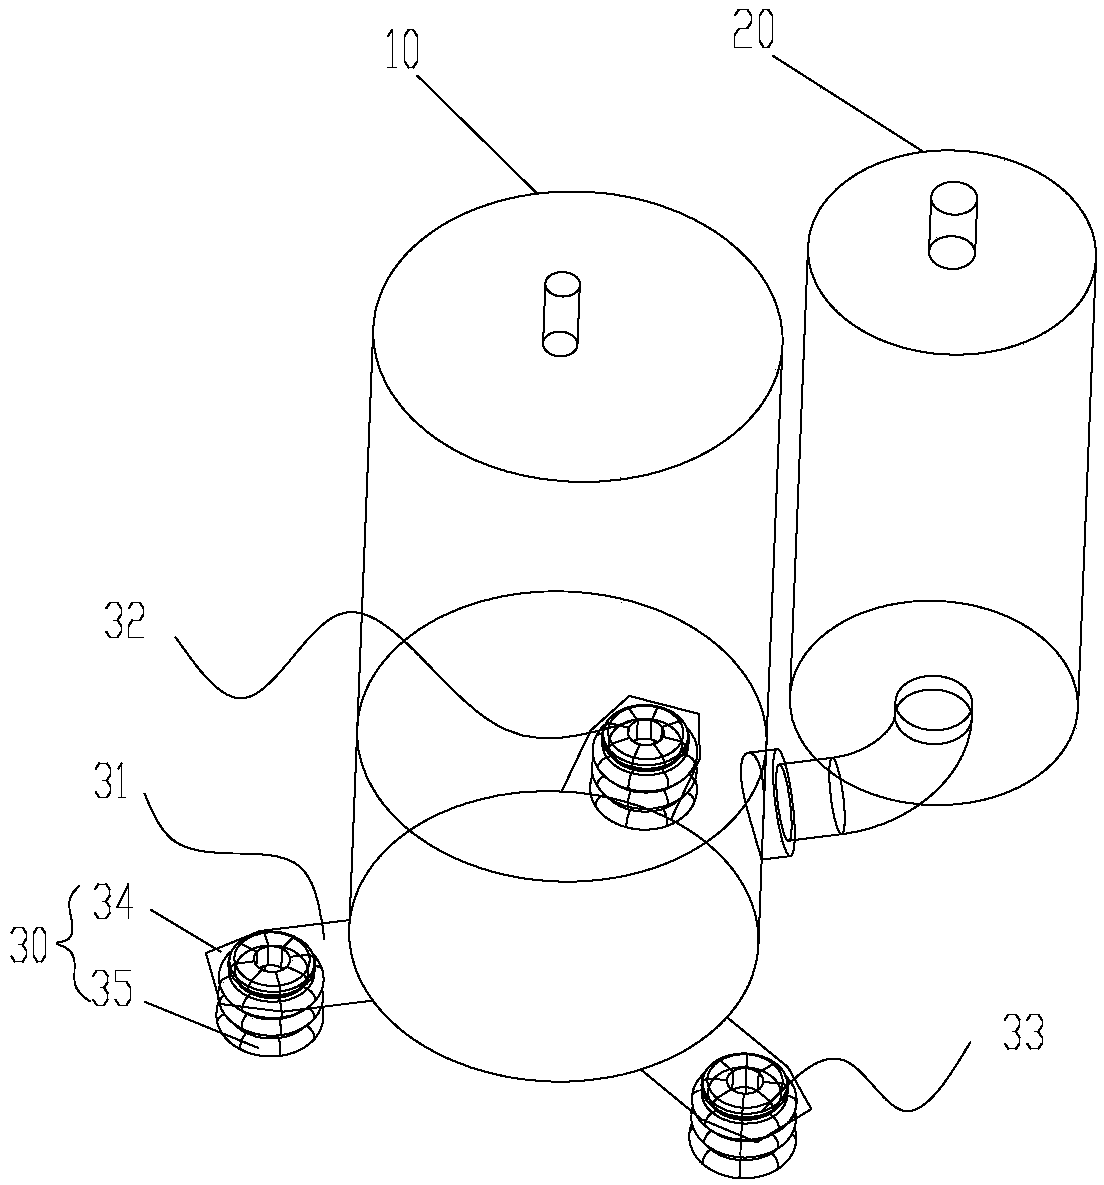 Compressor and air conditioner with same